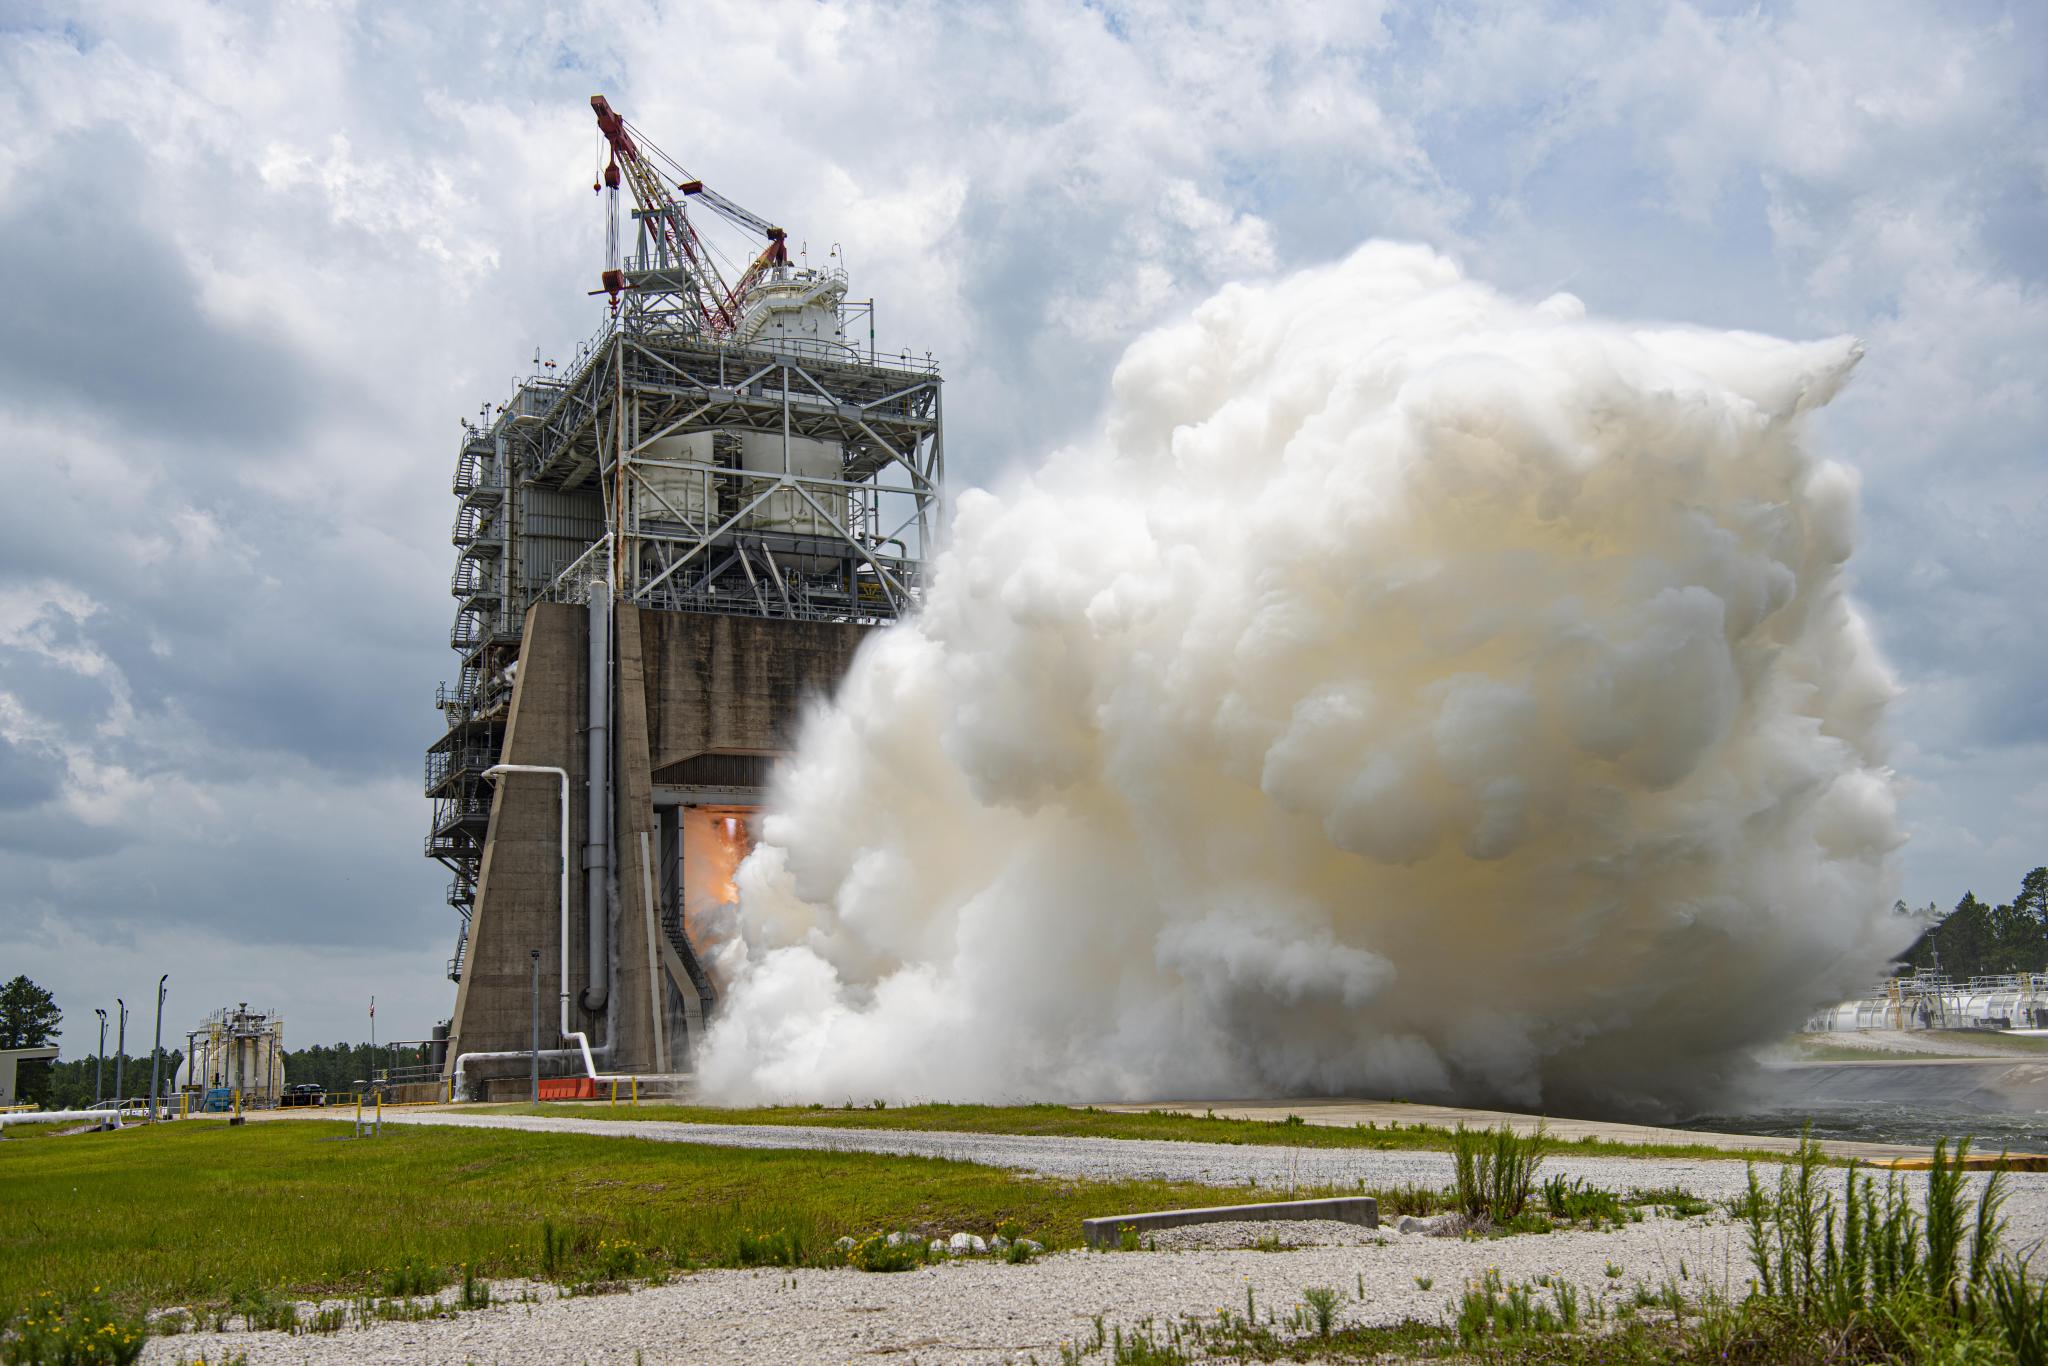 vapors erupting during a hot fire of a RS-25 engine